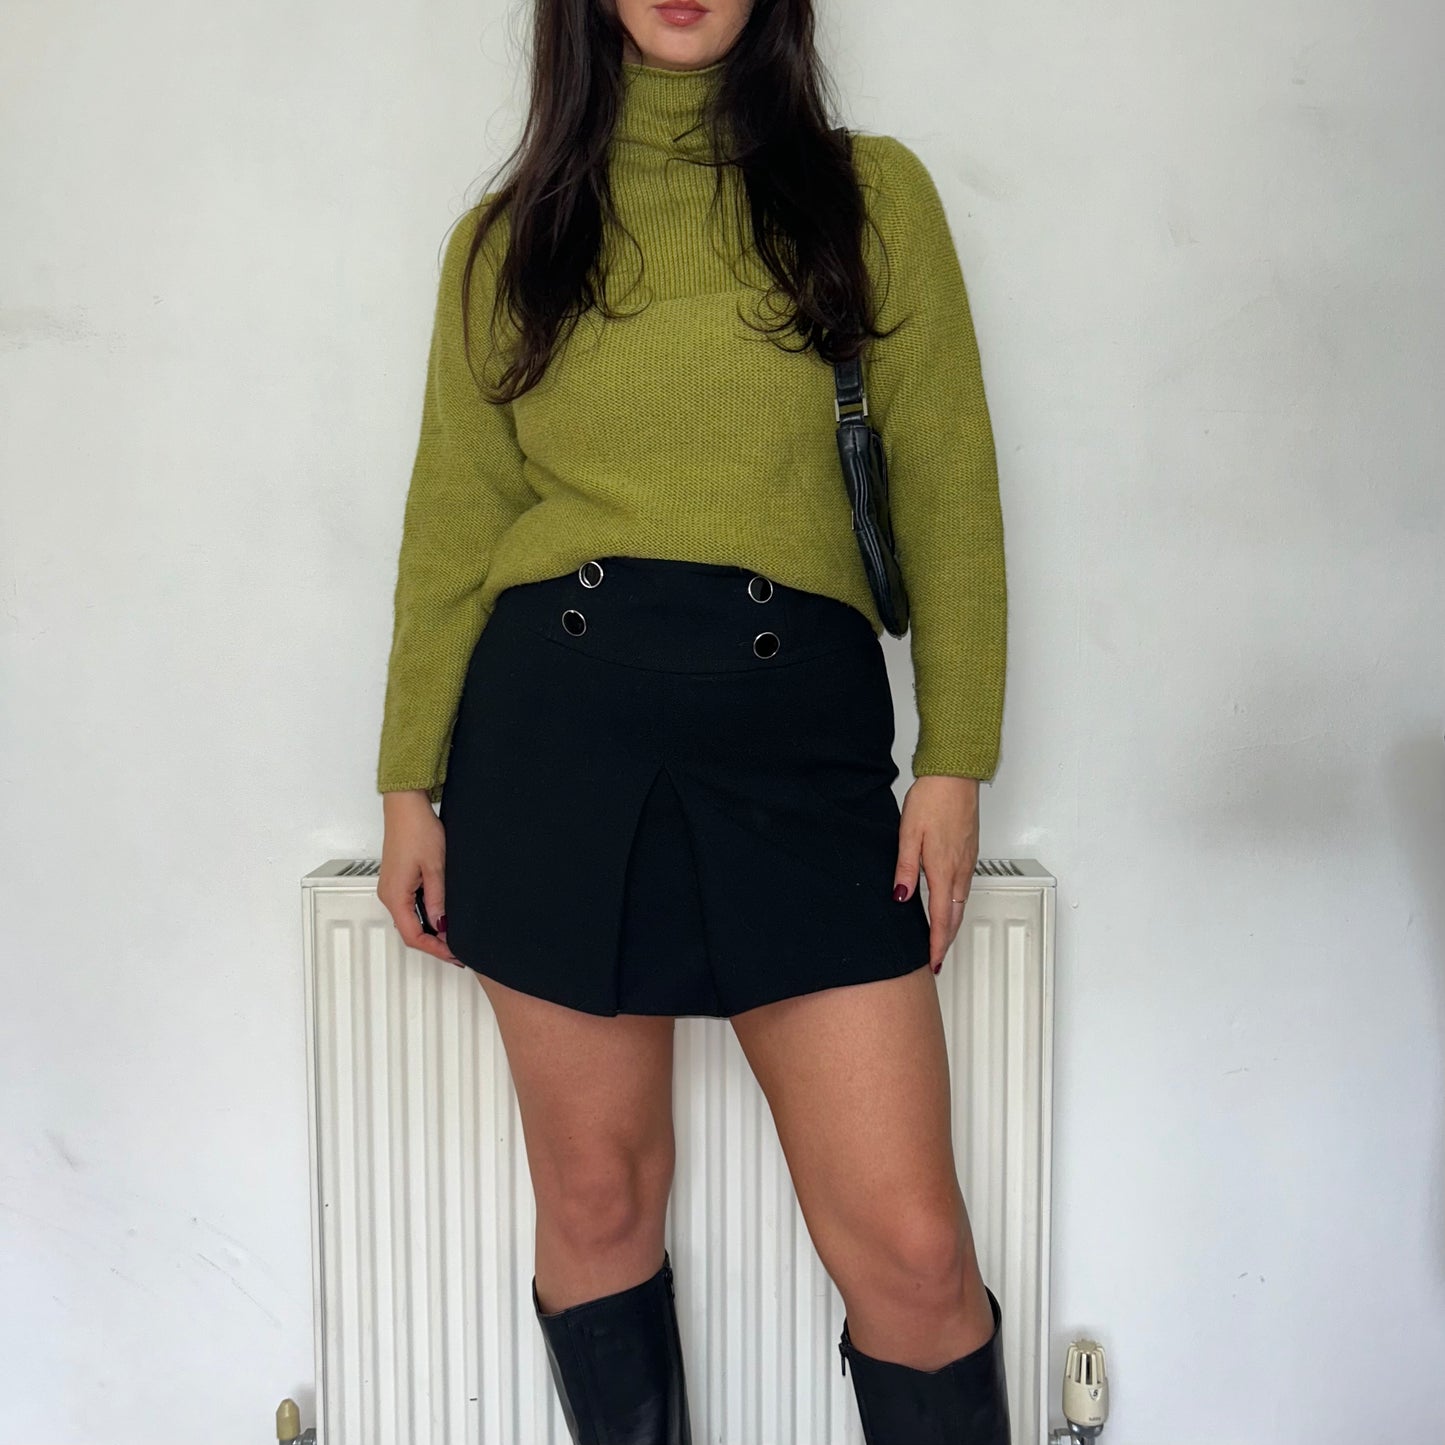 green high neck knit jumper shown on a model wearing a black mini skirt and black shoulder bag and black boots